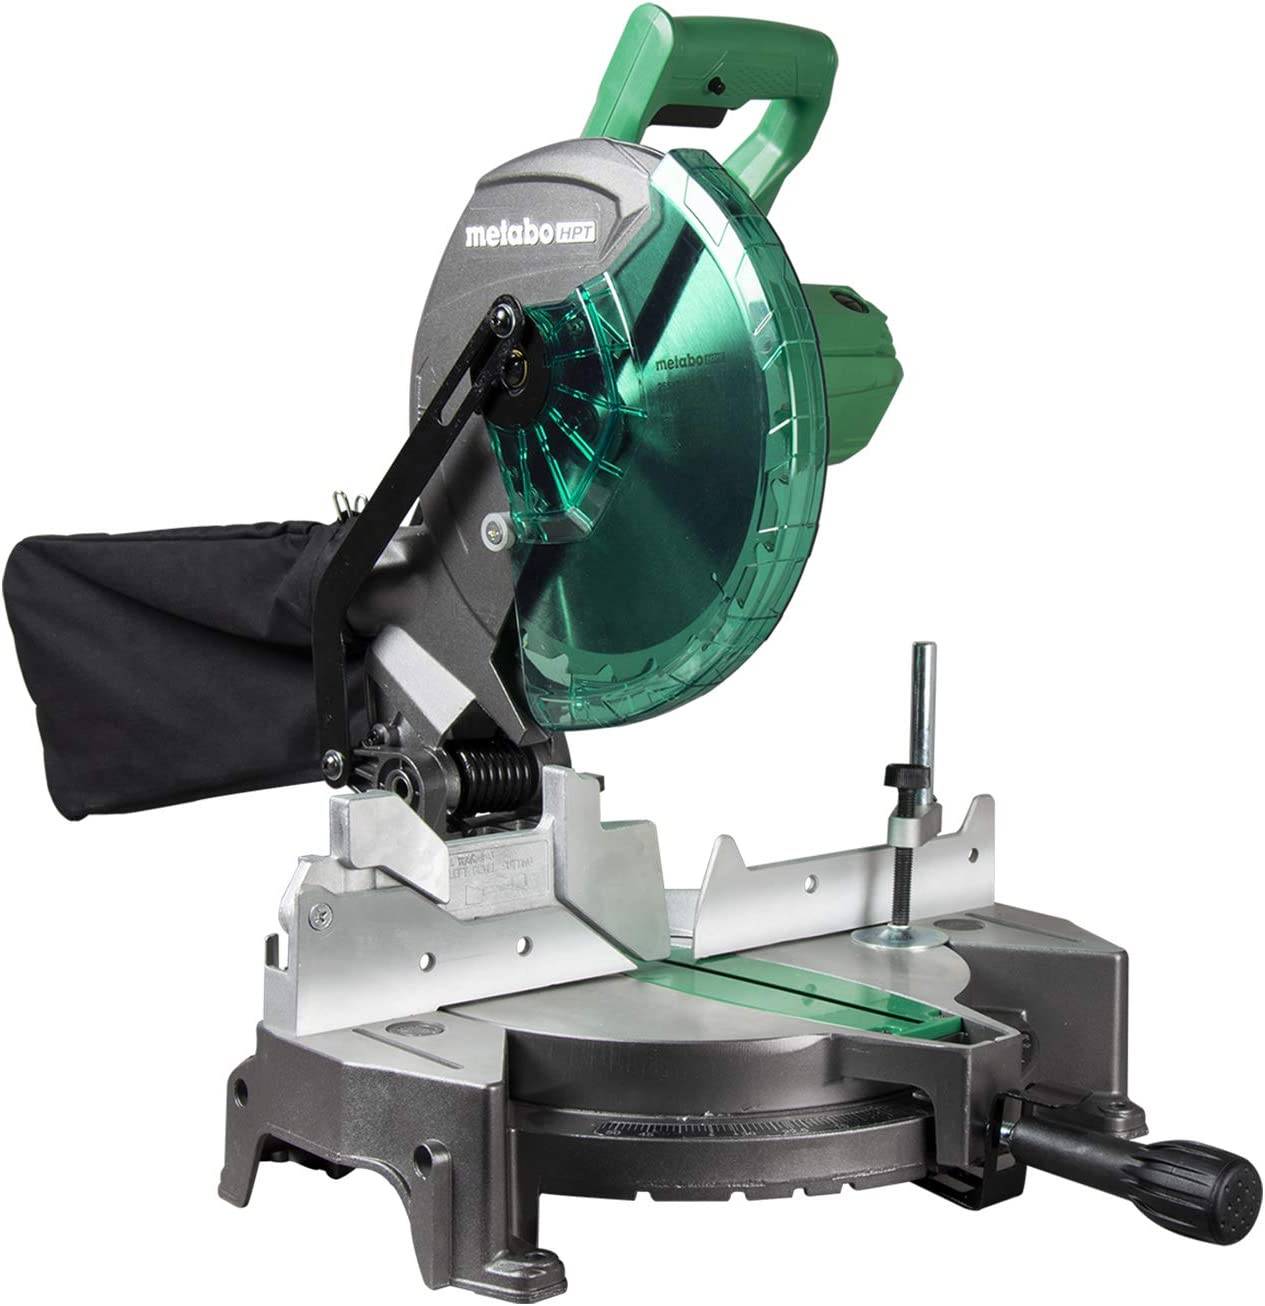 Best Mitre Saw For Picture Frames